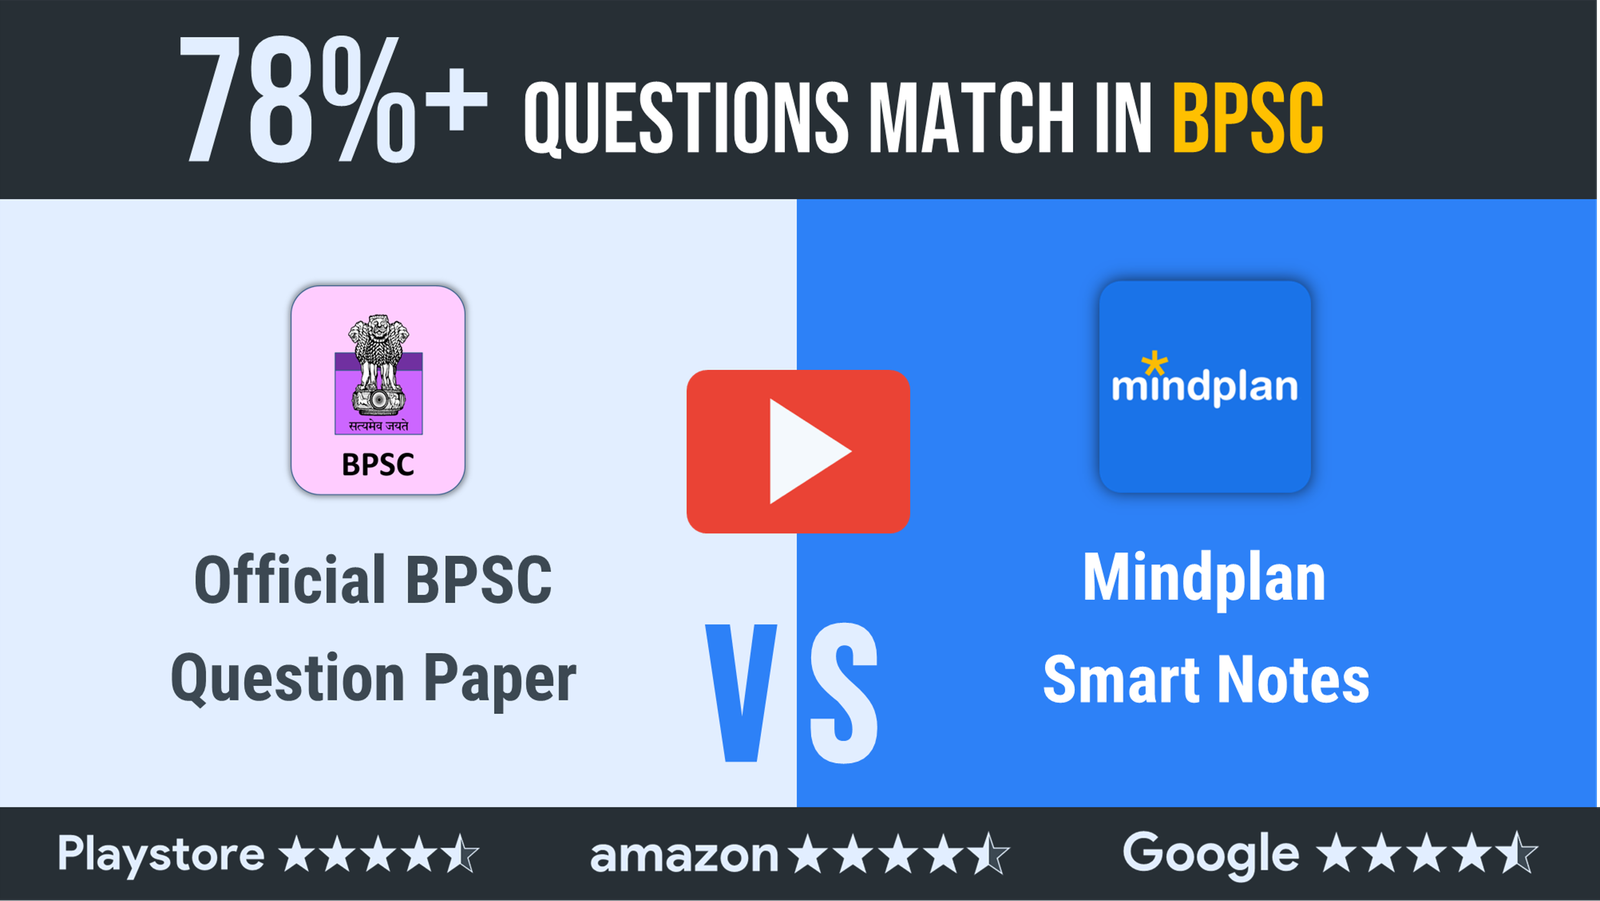 bpsc book notes bihar current affairs pt questions match video cover